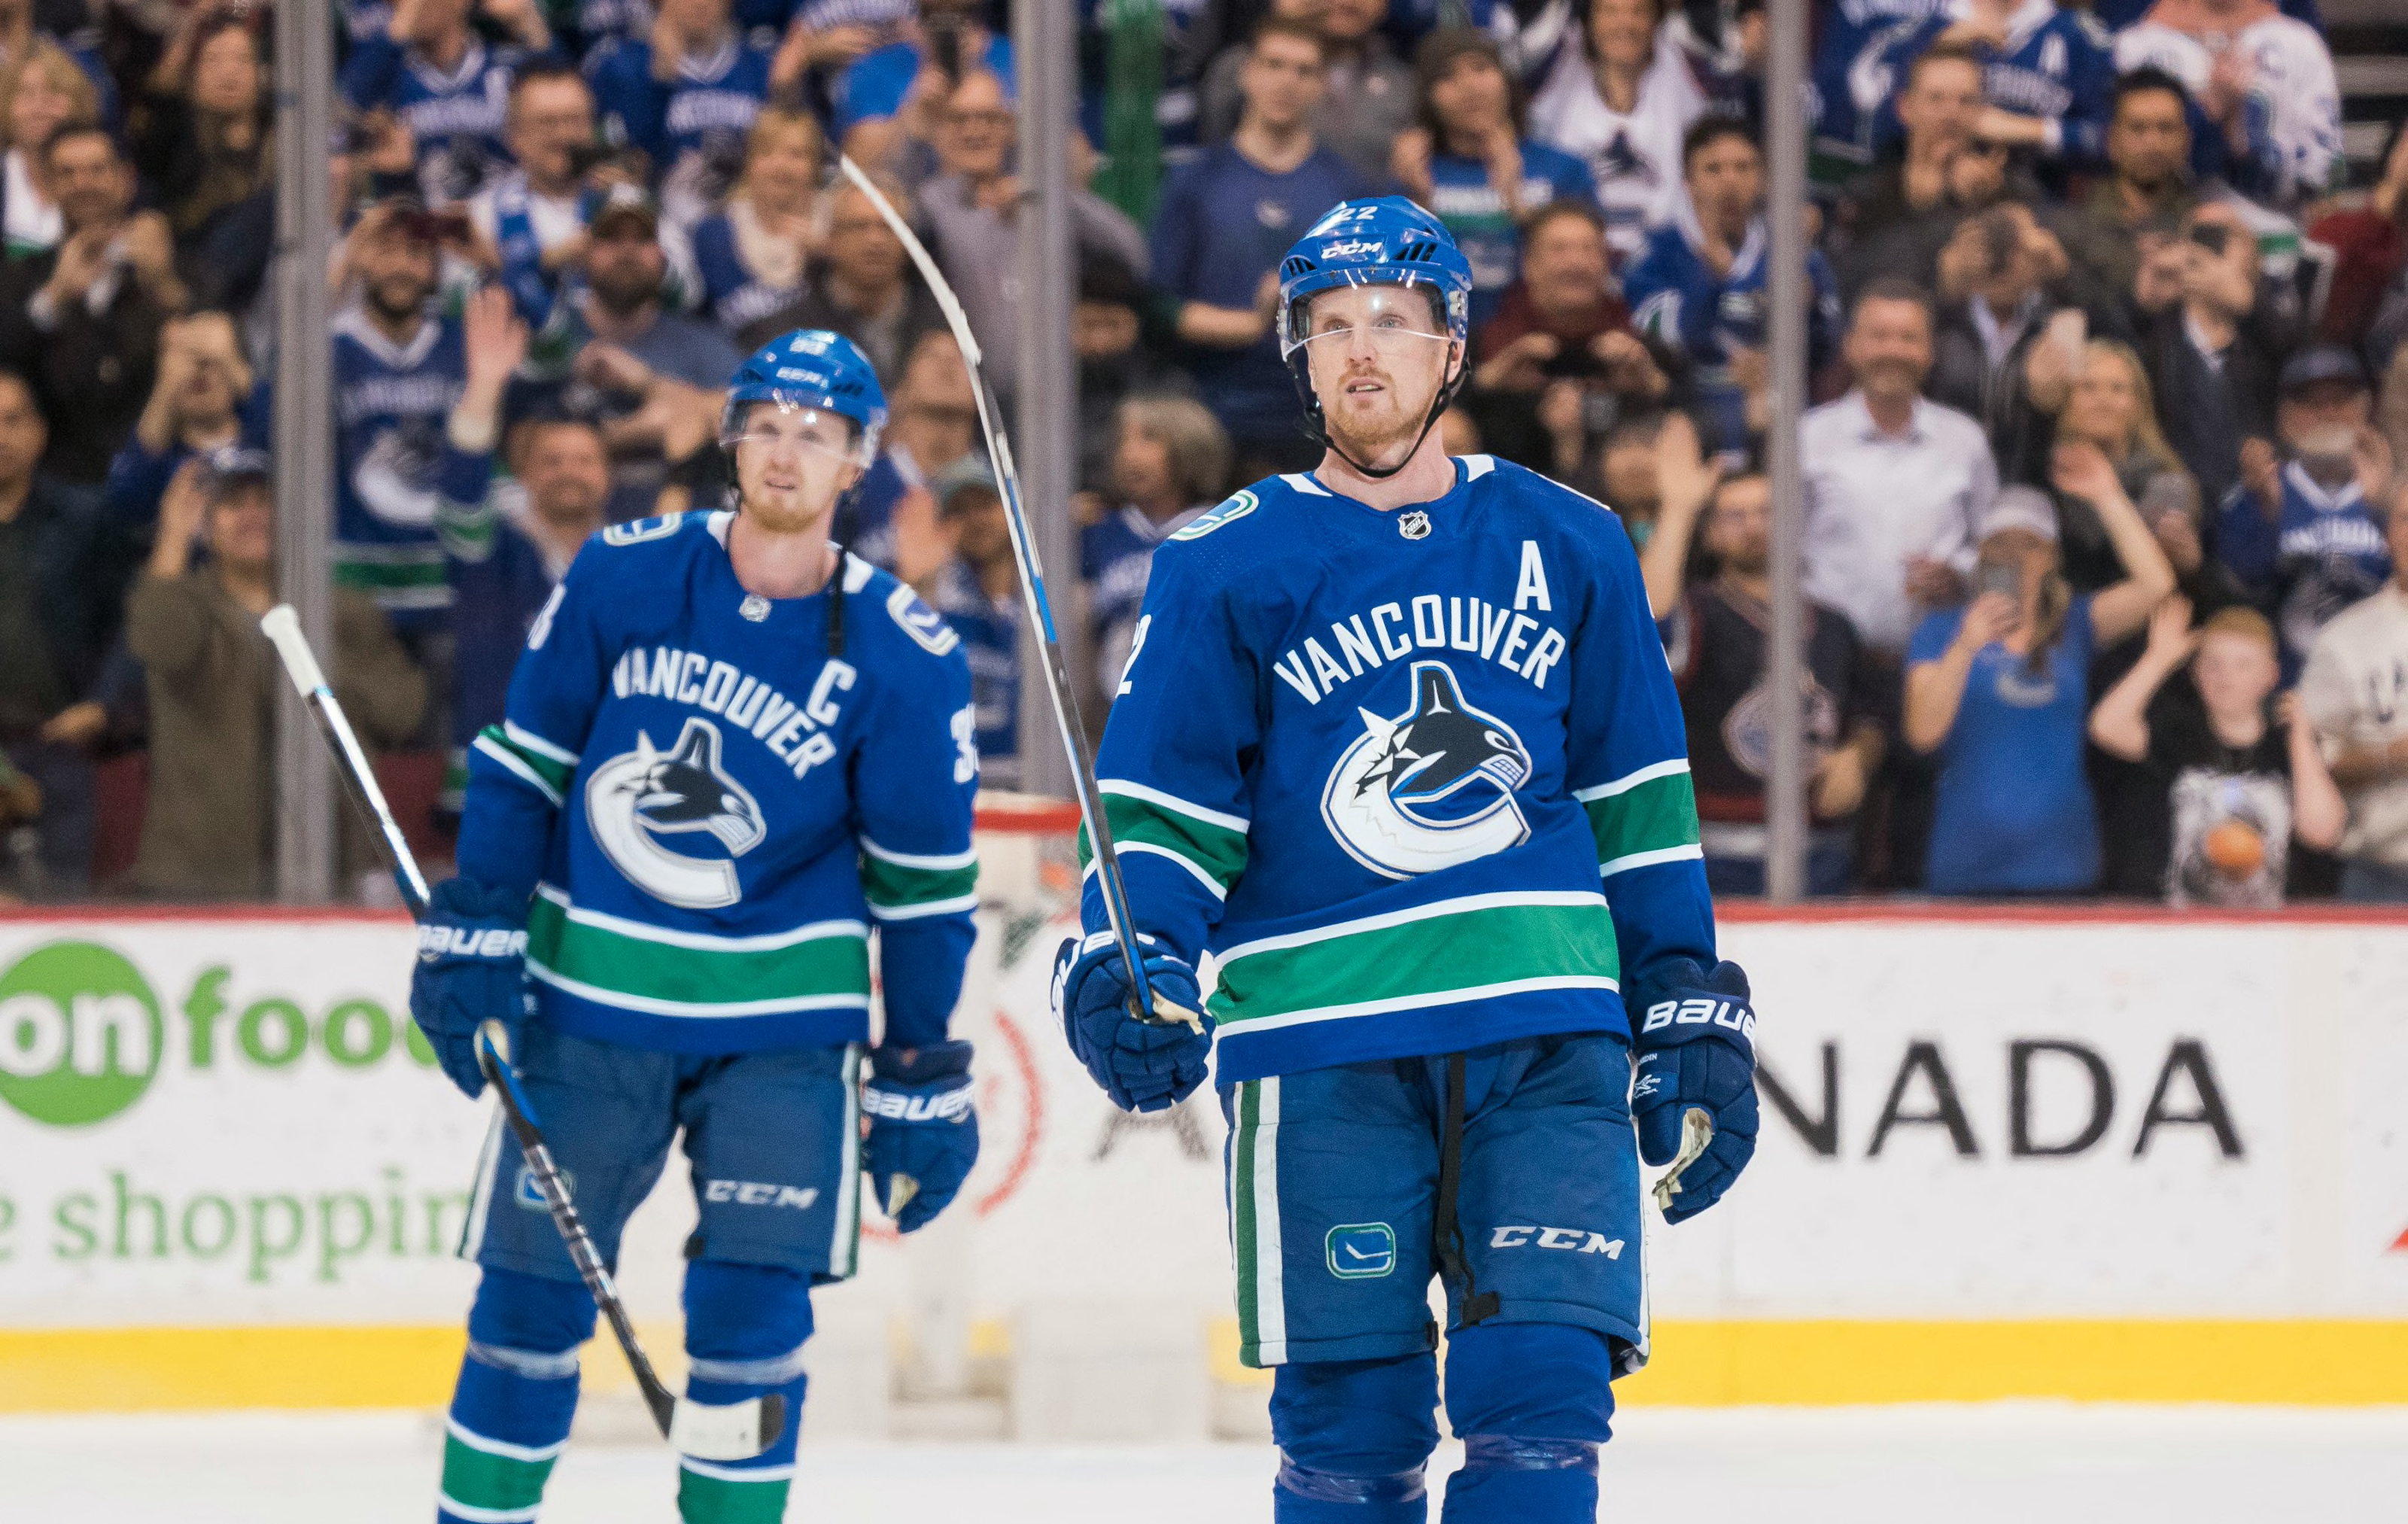 What a night for Canucks fans': Twitter reacts to Sedins' jersey